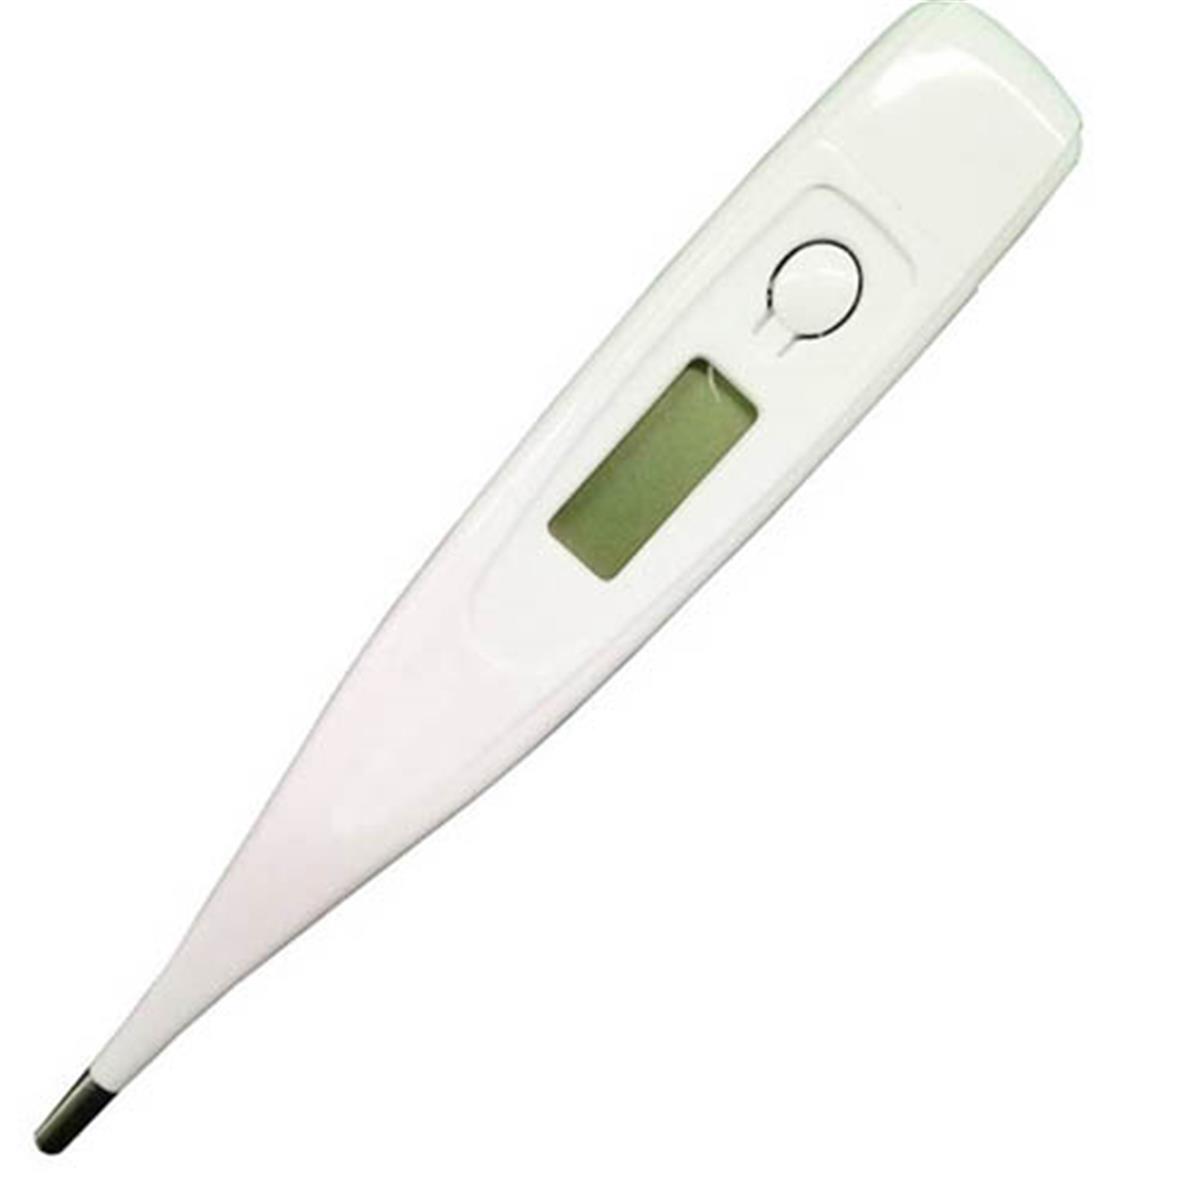 Picture of Veridian 2183E 60 Second Rigid Electronic Digital Thermometer